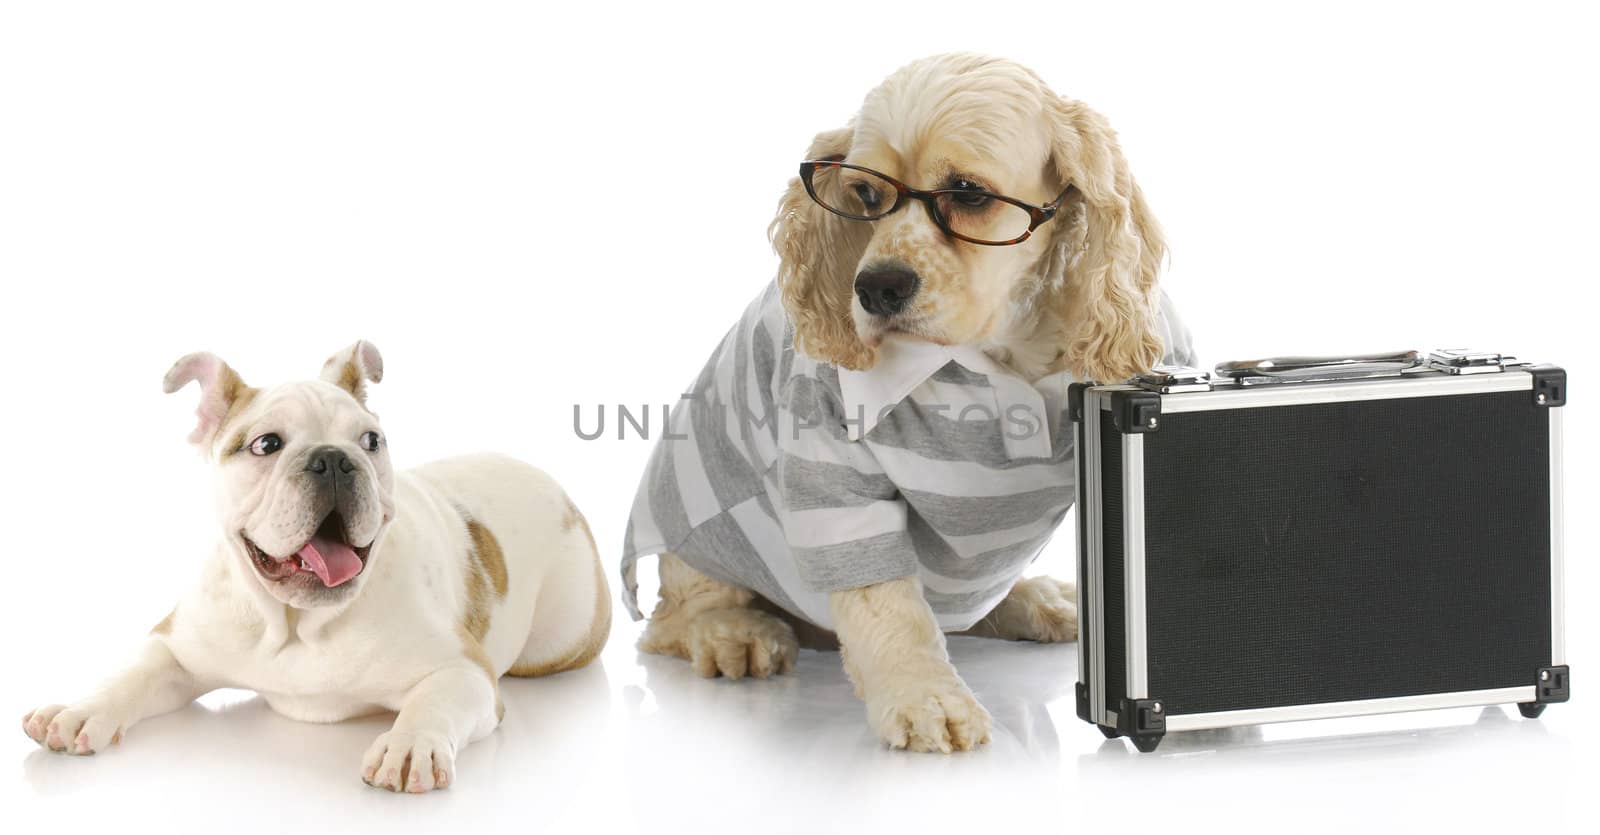 business deal - excited bulldog puppy looking at cocker spaniel business man with briefcase